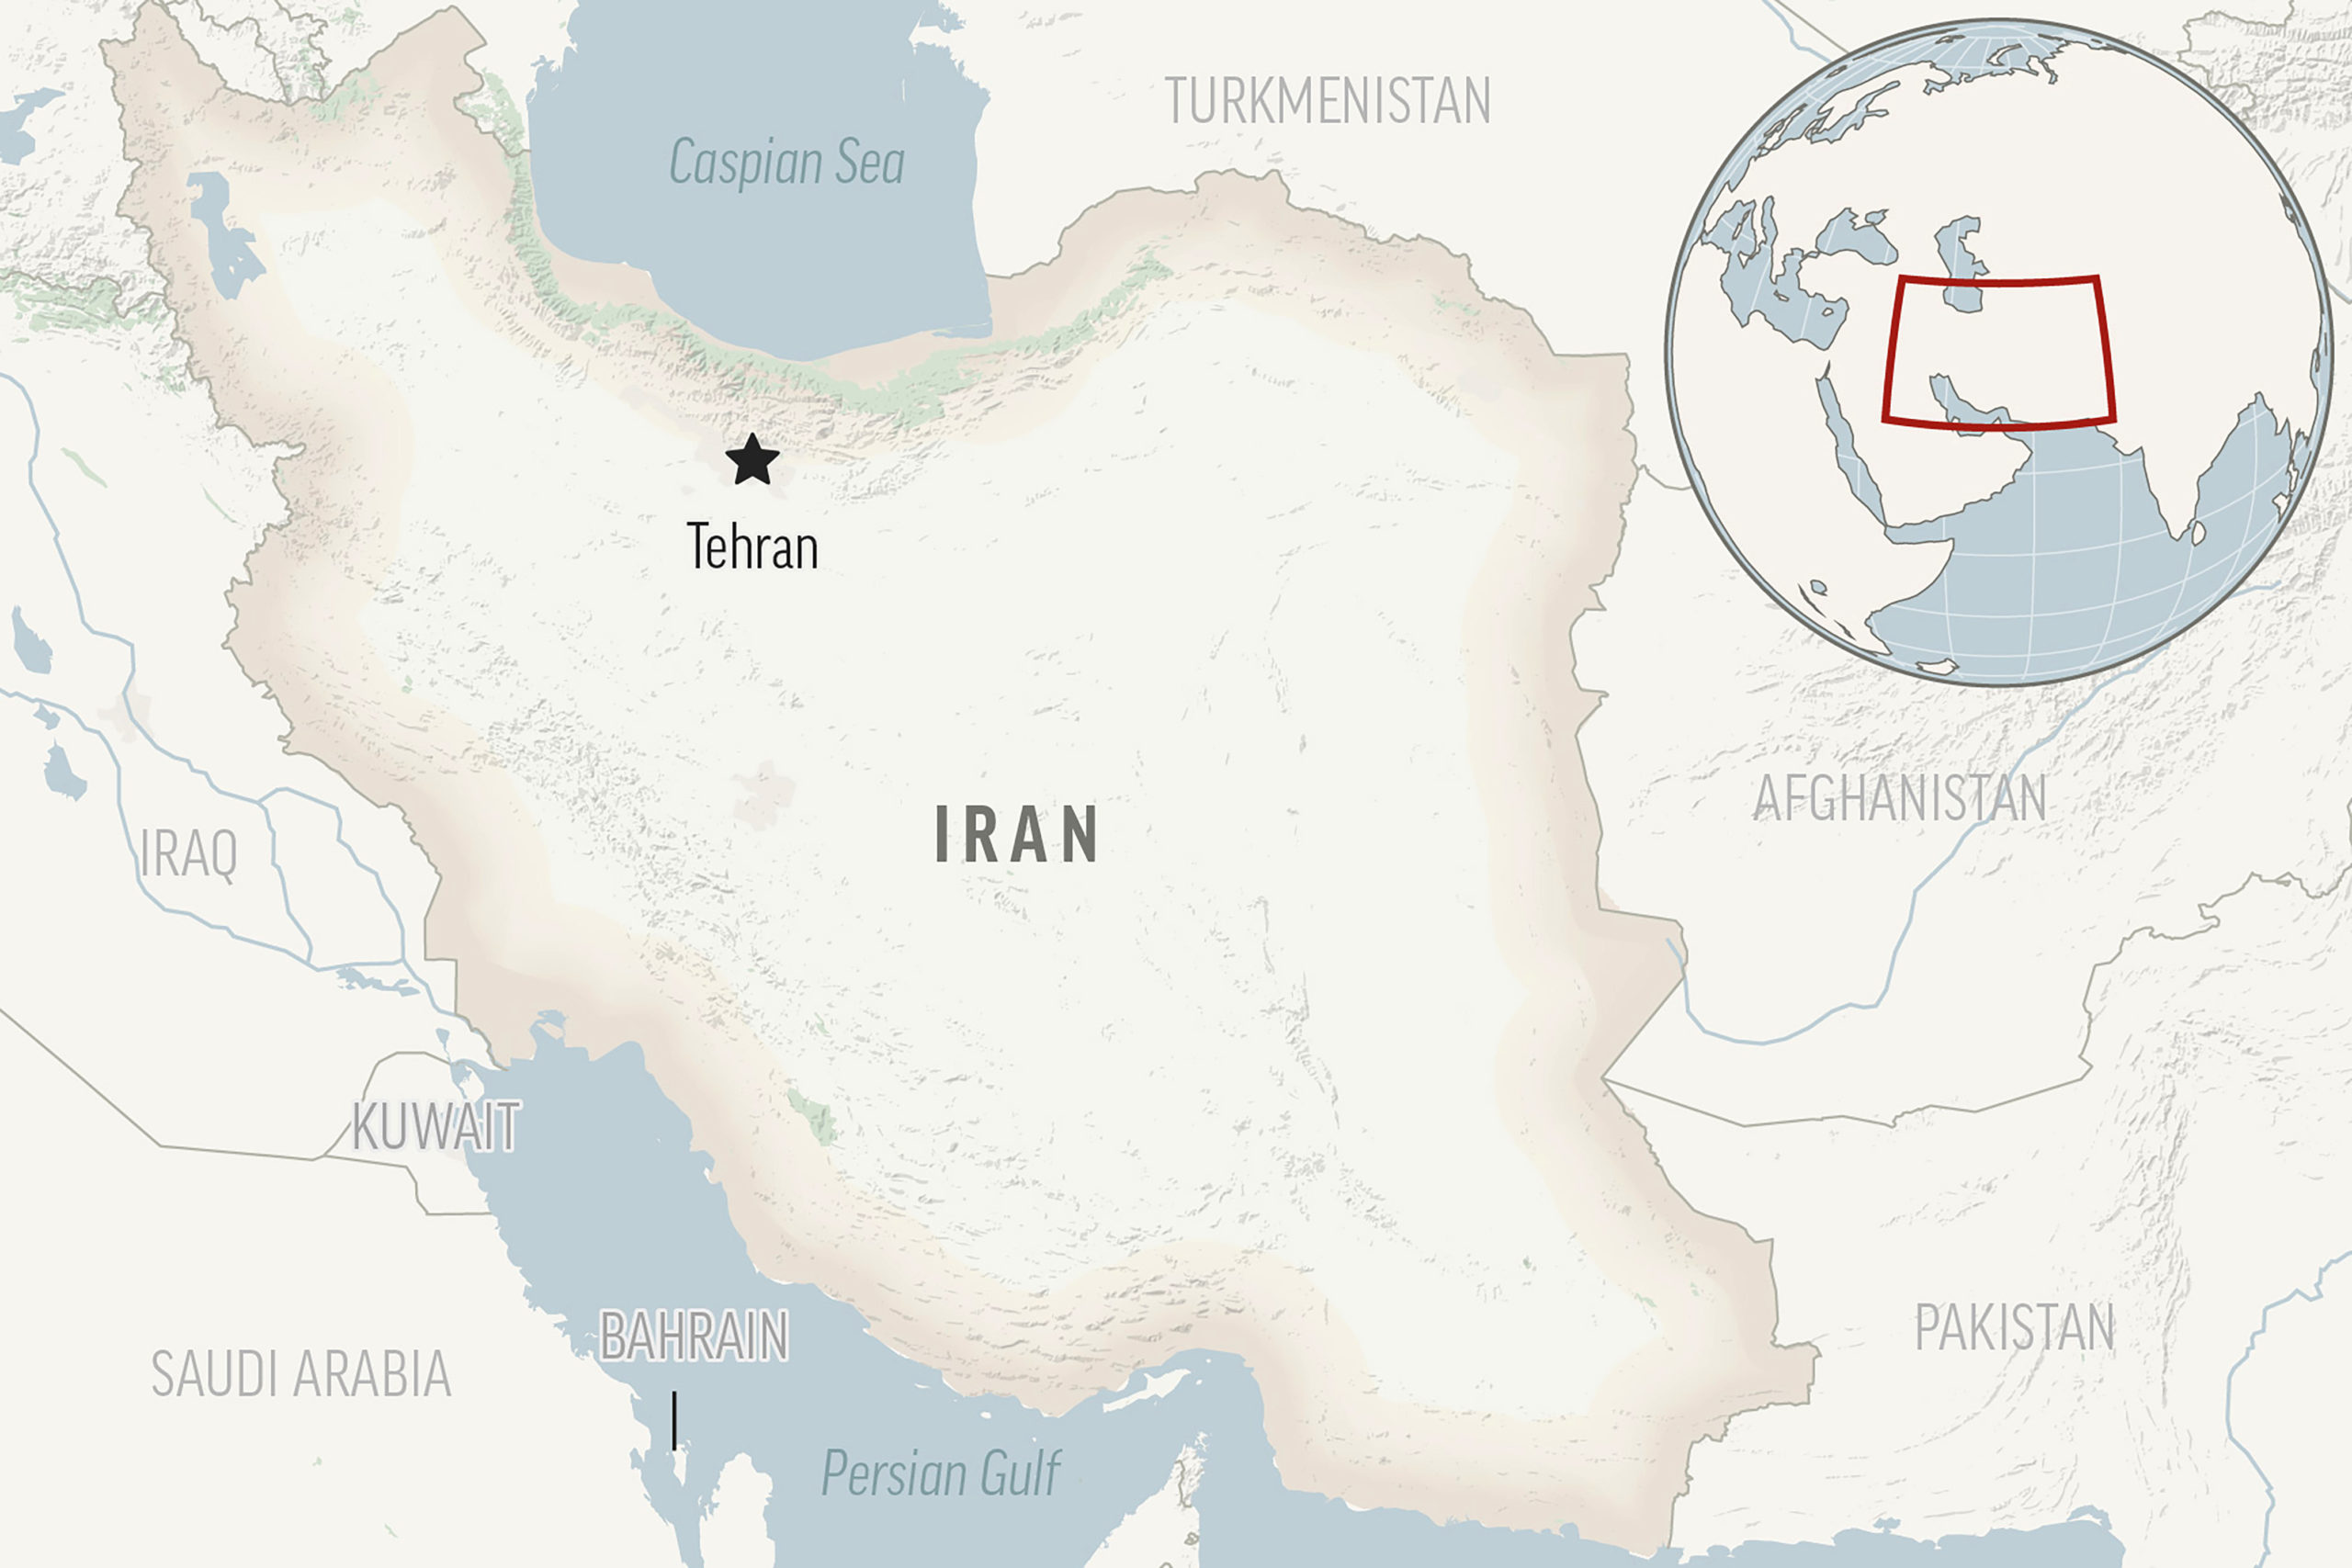 A locator map identifies Iran and its capital, Tehran, in the Middle East.